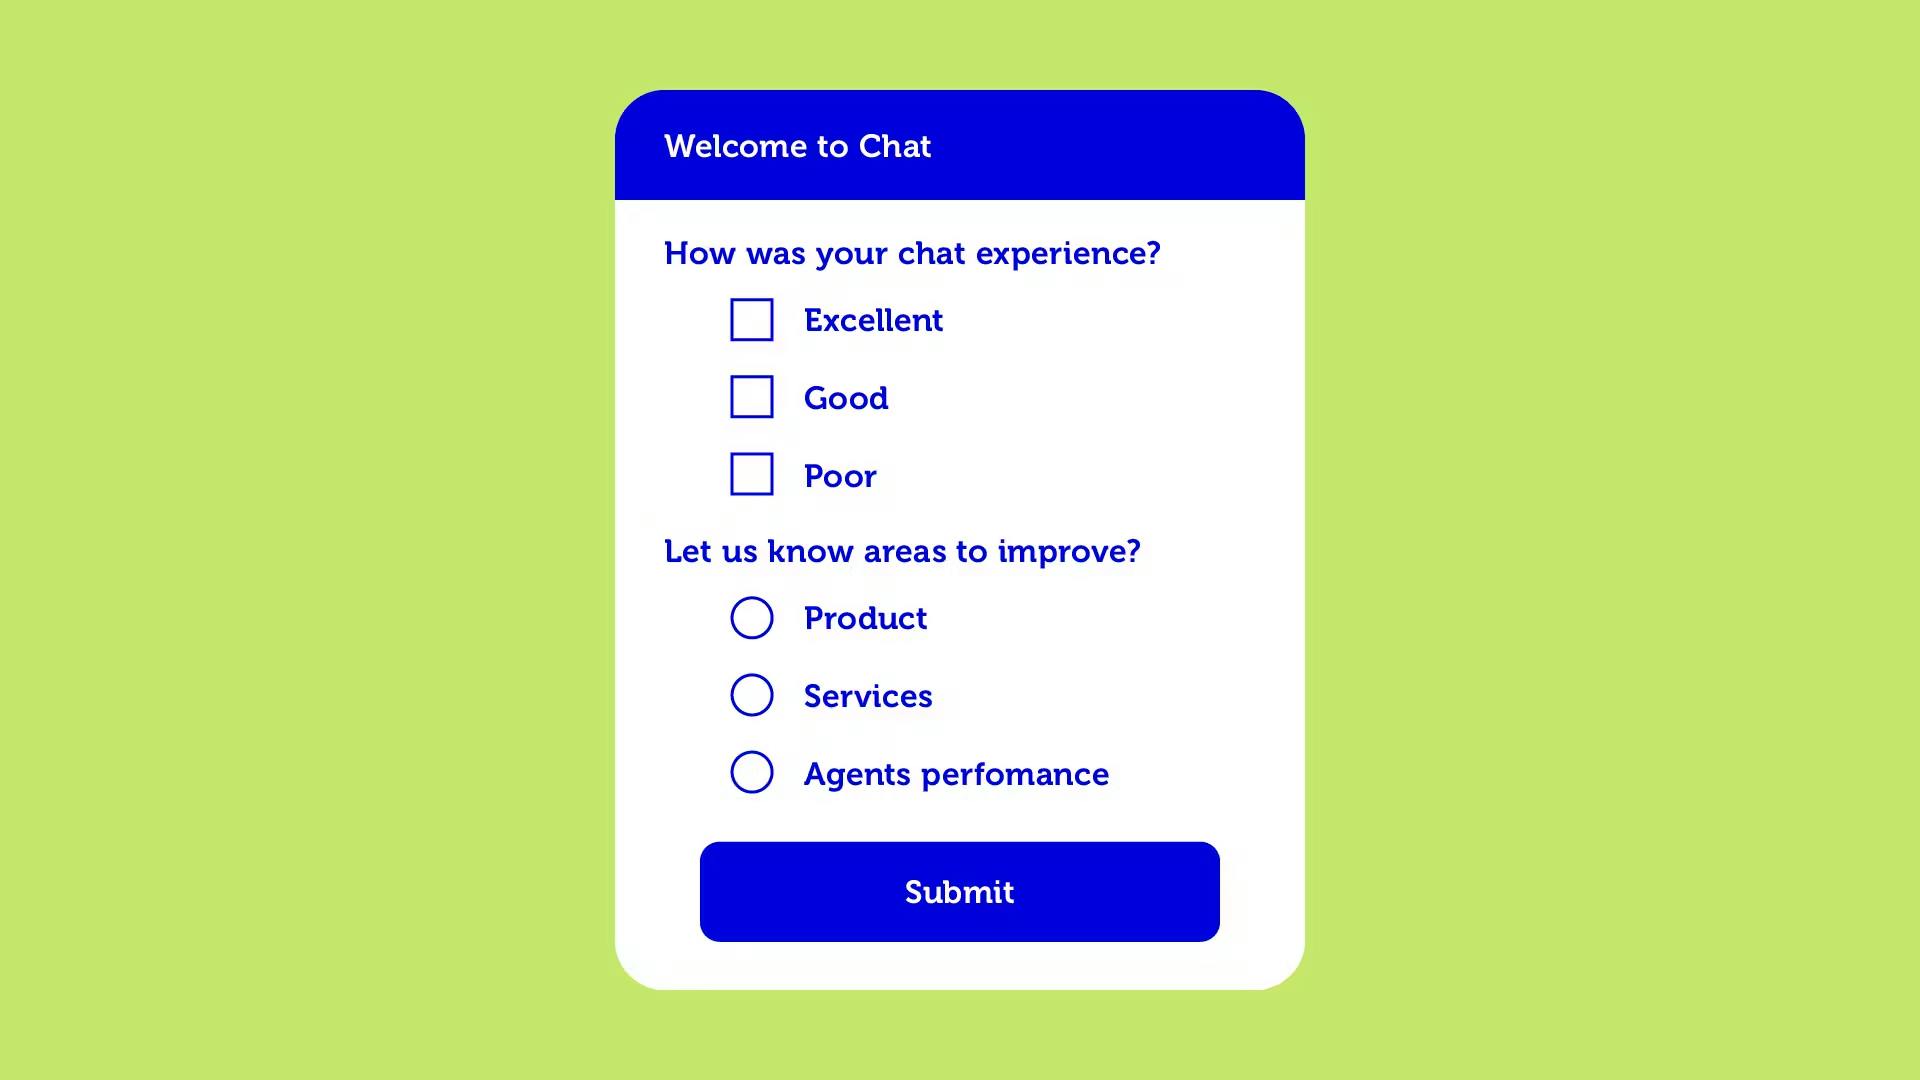 Live-chat systems